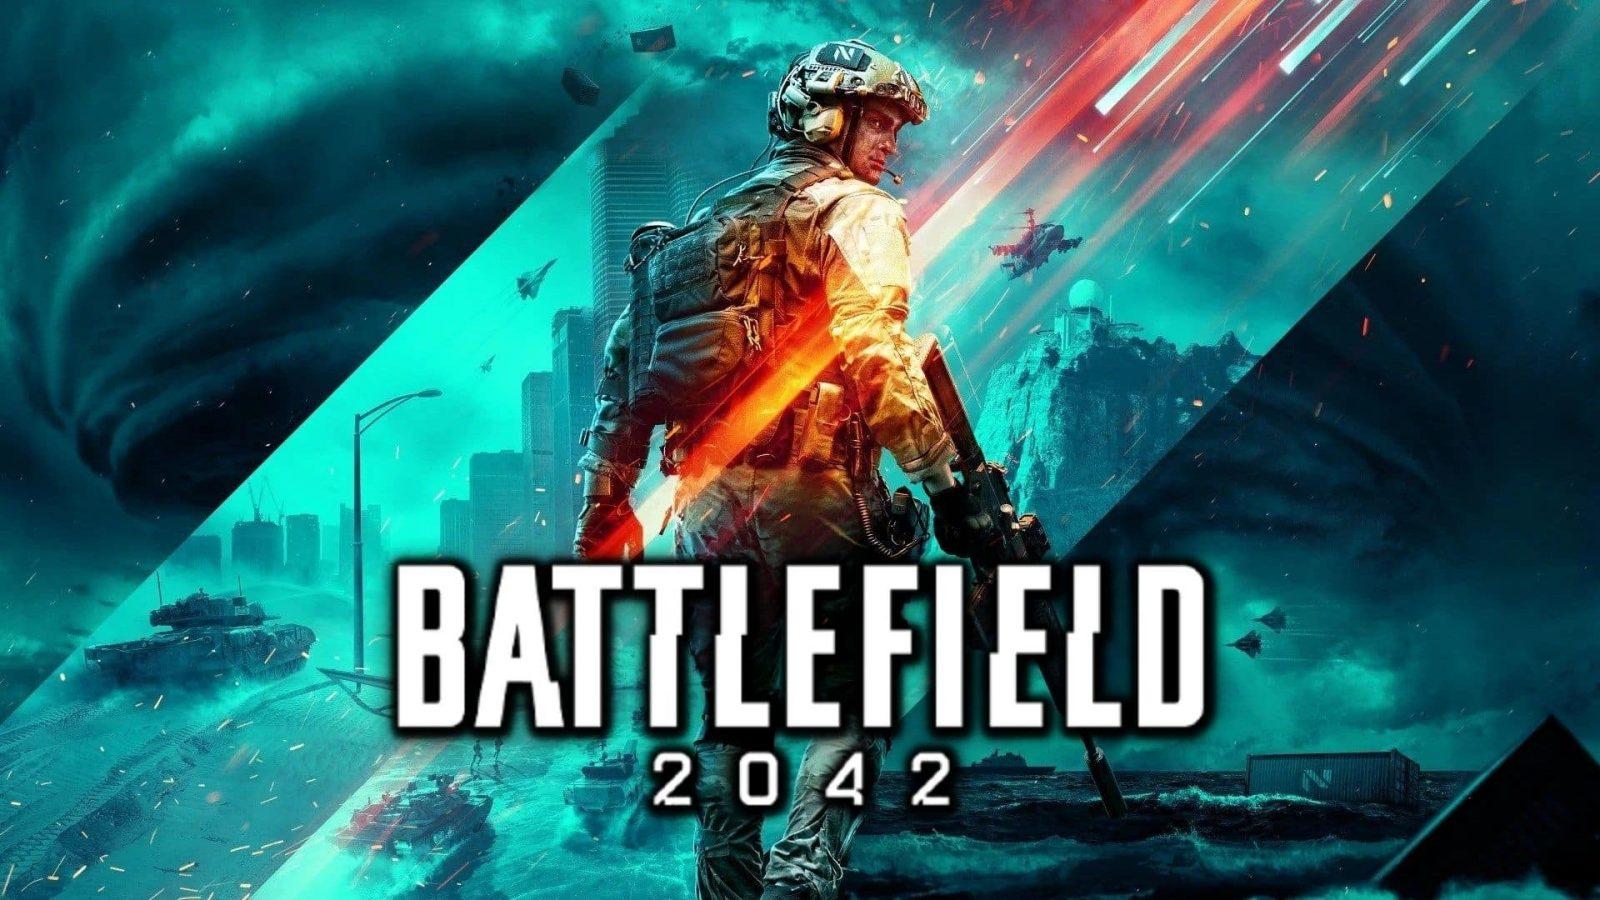 Game Pass - let's hope for a massive influx of fresh players… :  r/battlefield2042